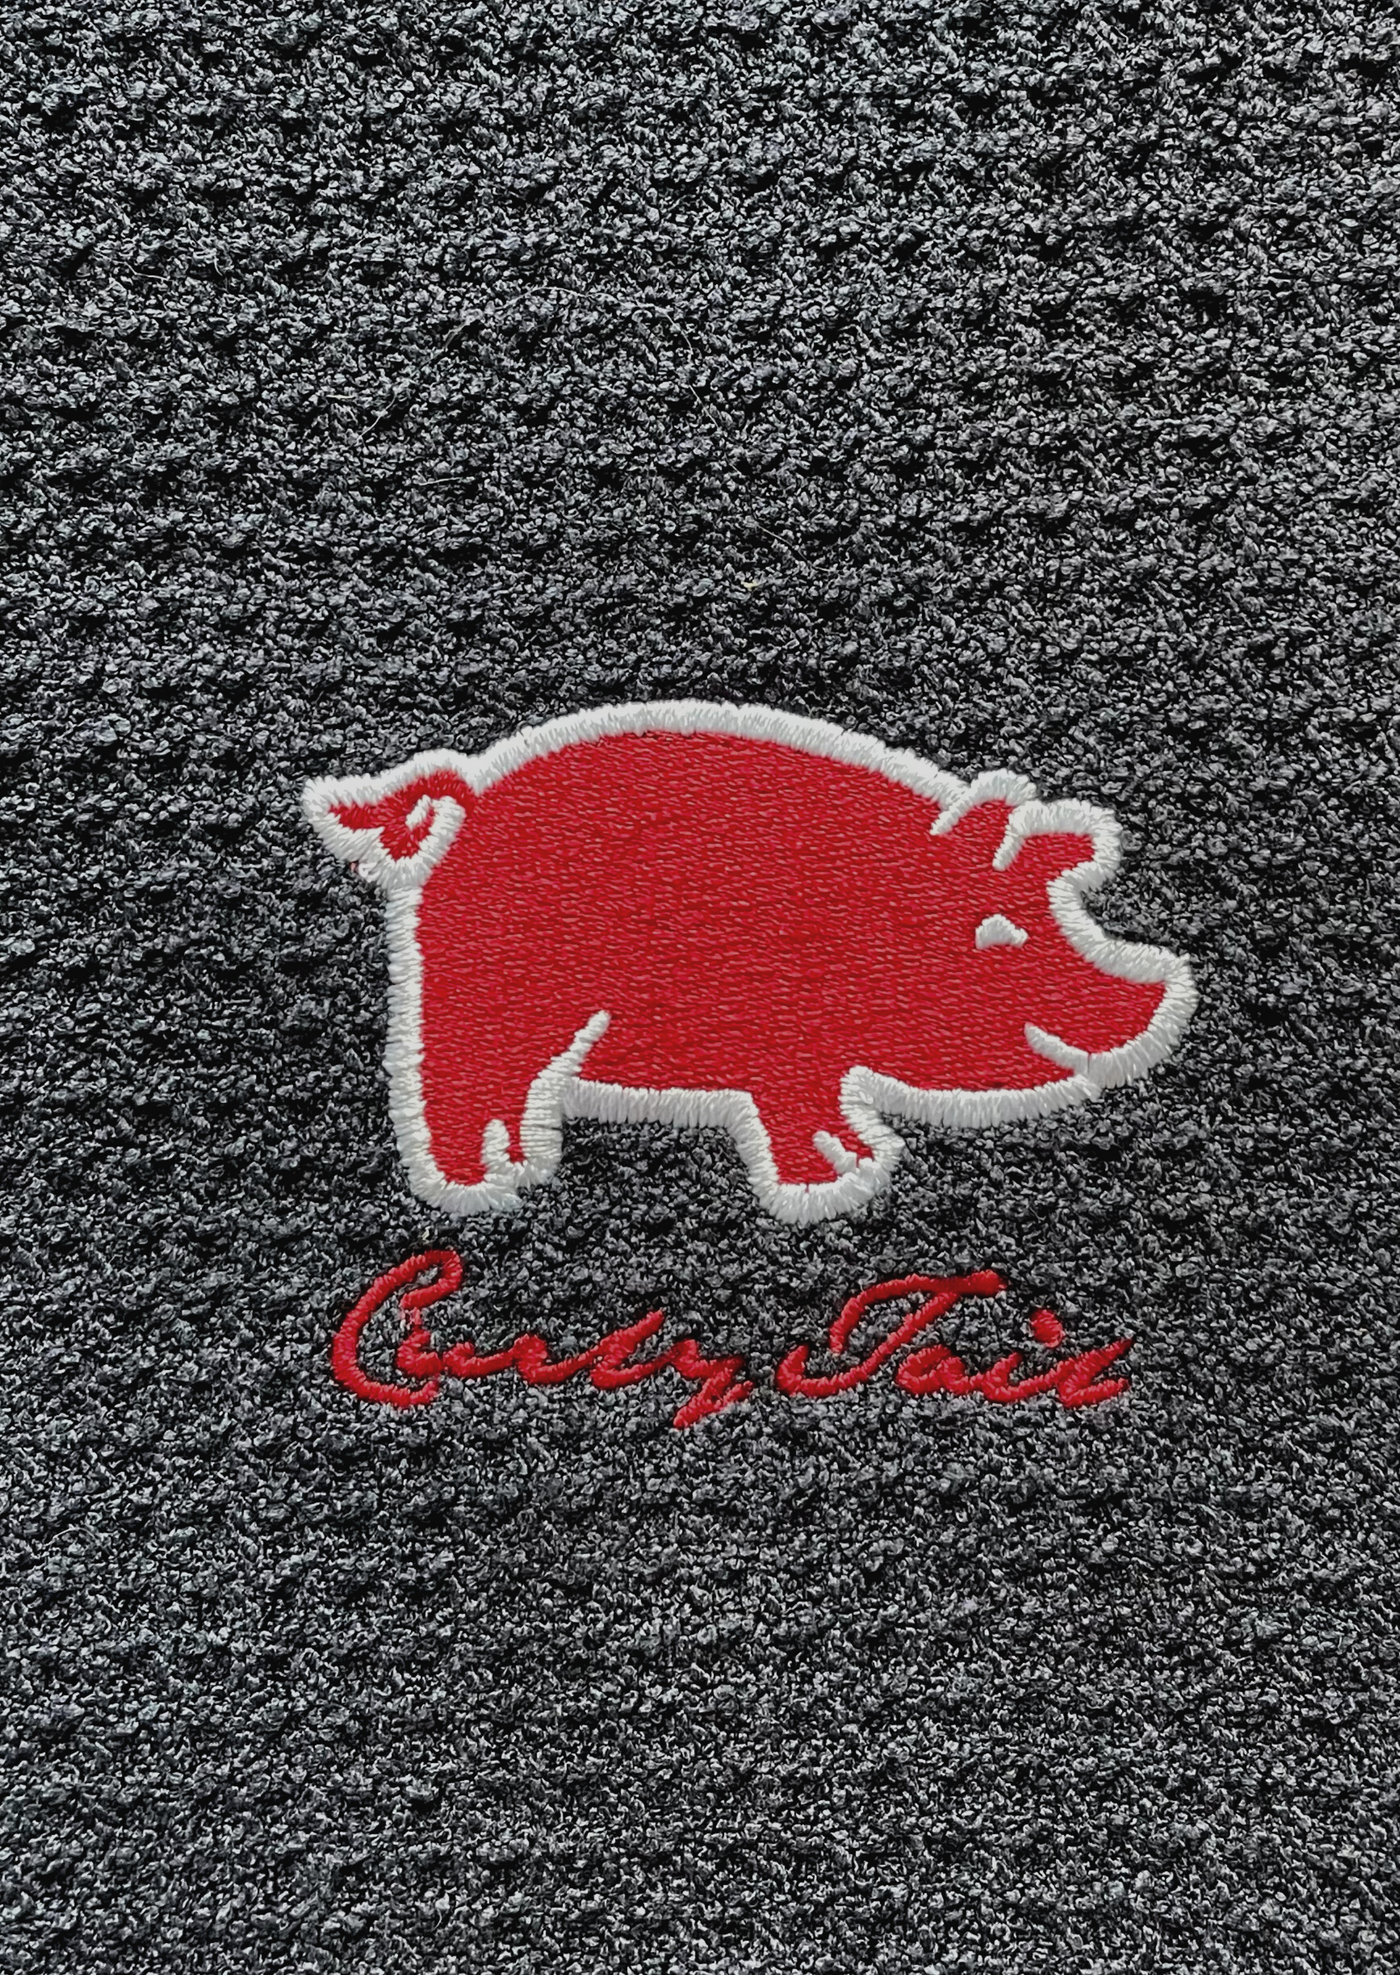 Curly Tail Golf Towel